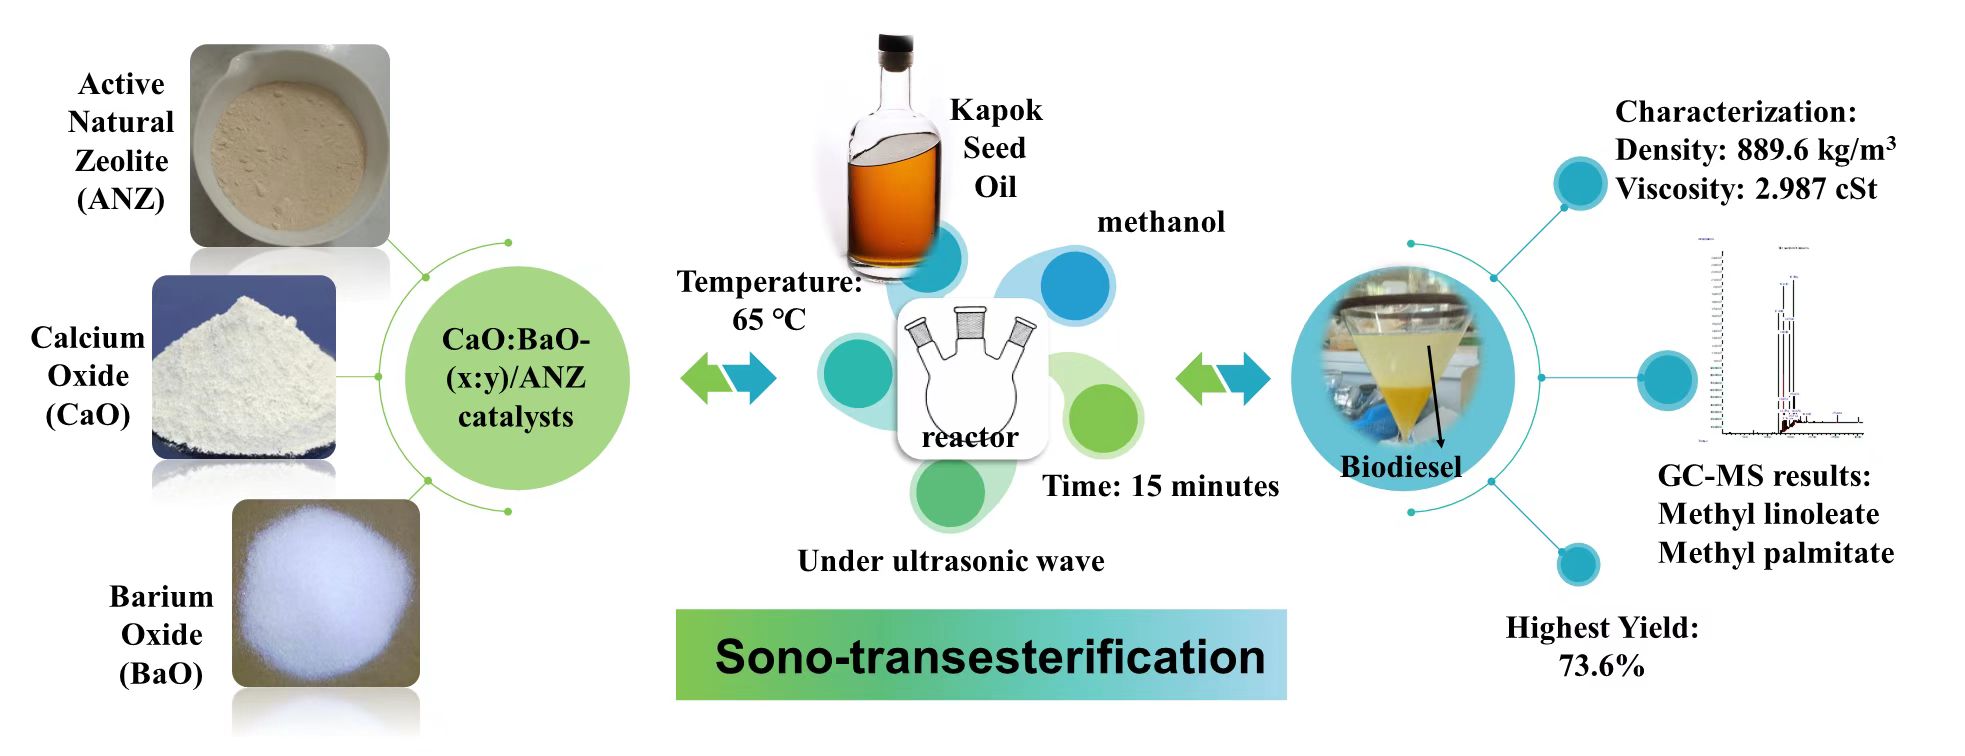 Sono-Transesterification of Kapok Seed Oil with CaO:BaO-(x:y)/Active Natural Zeolite Catalyst